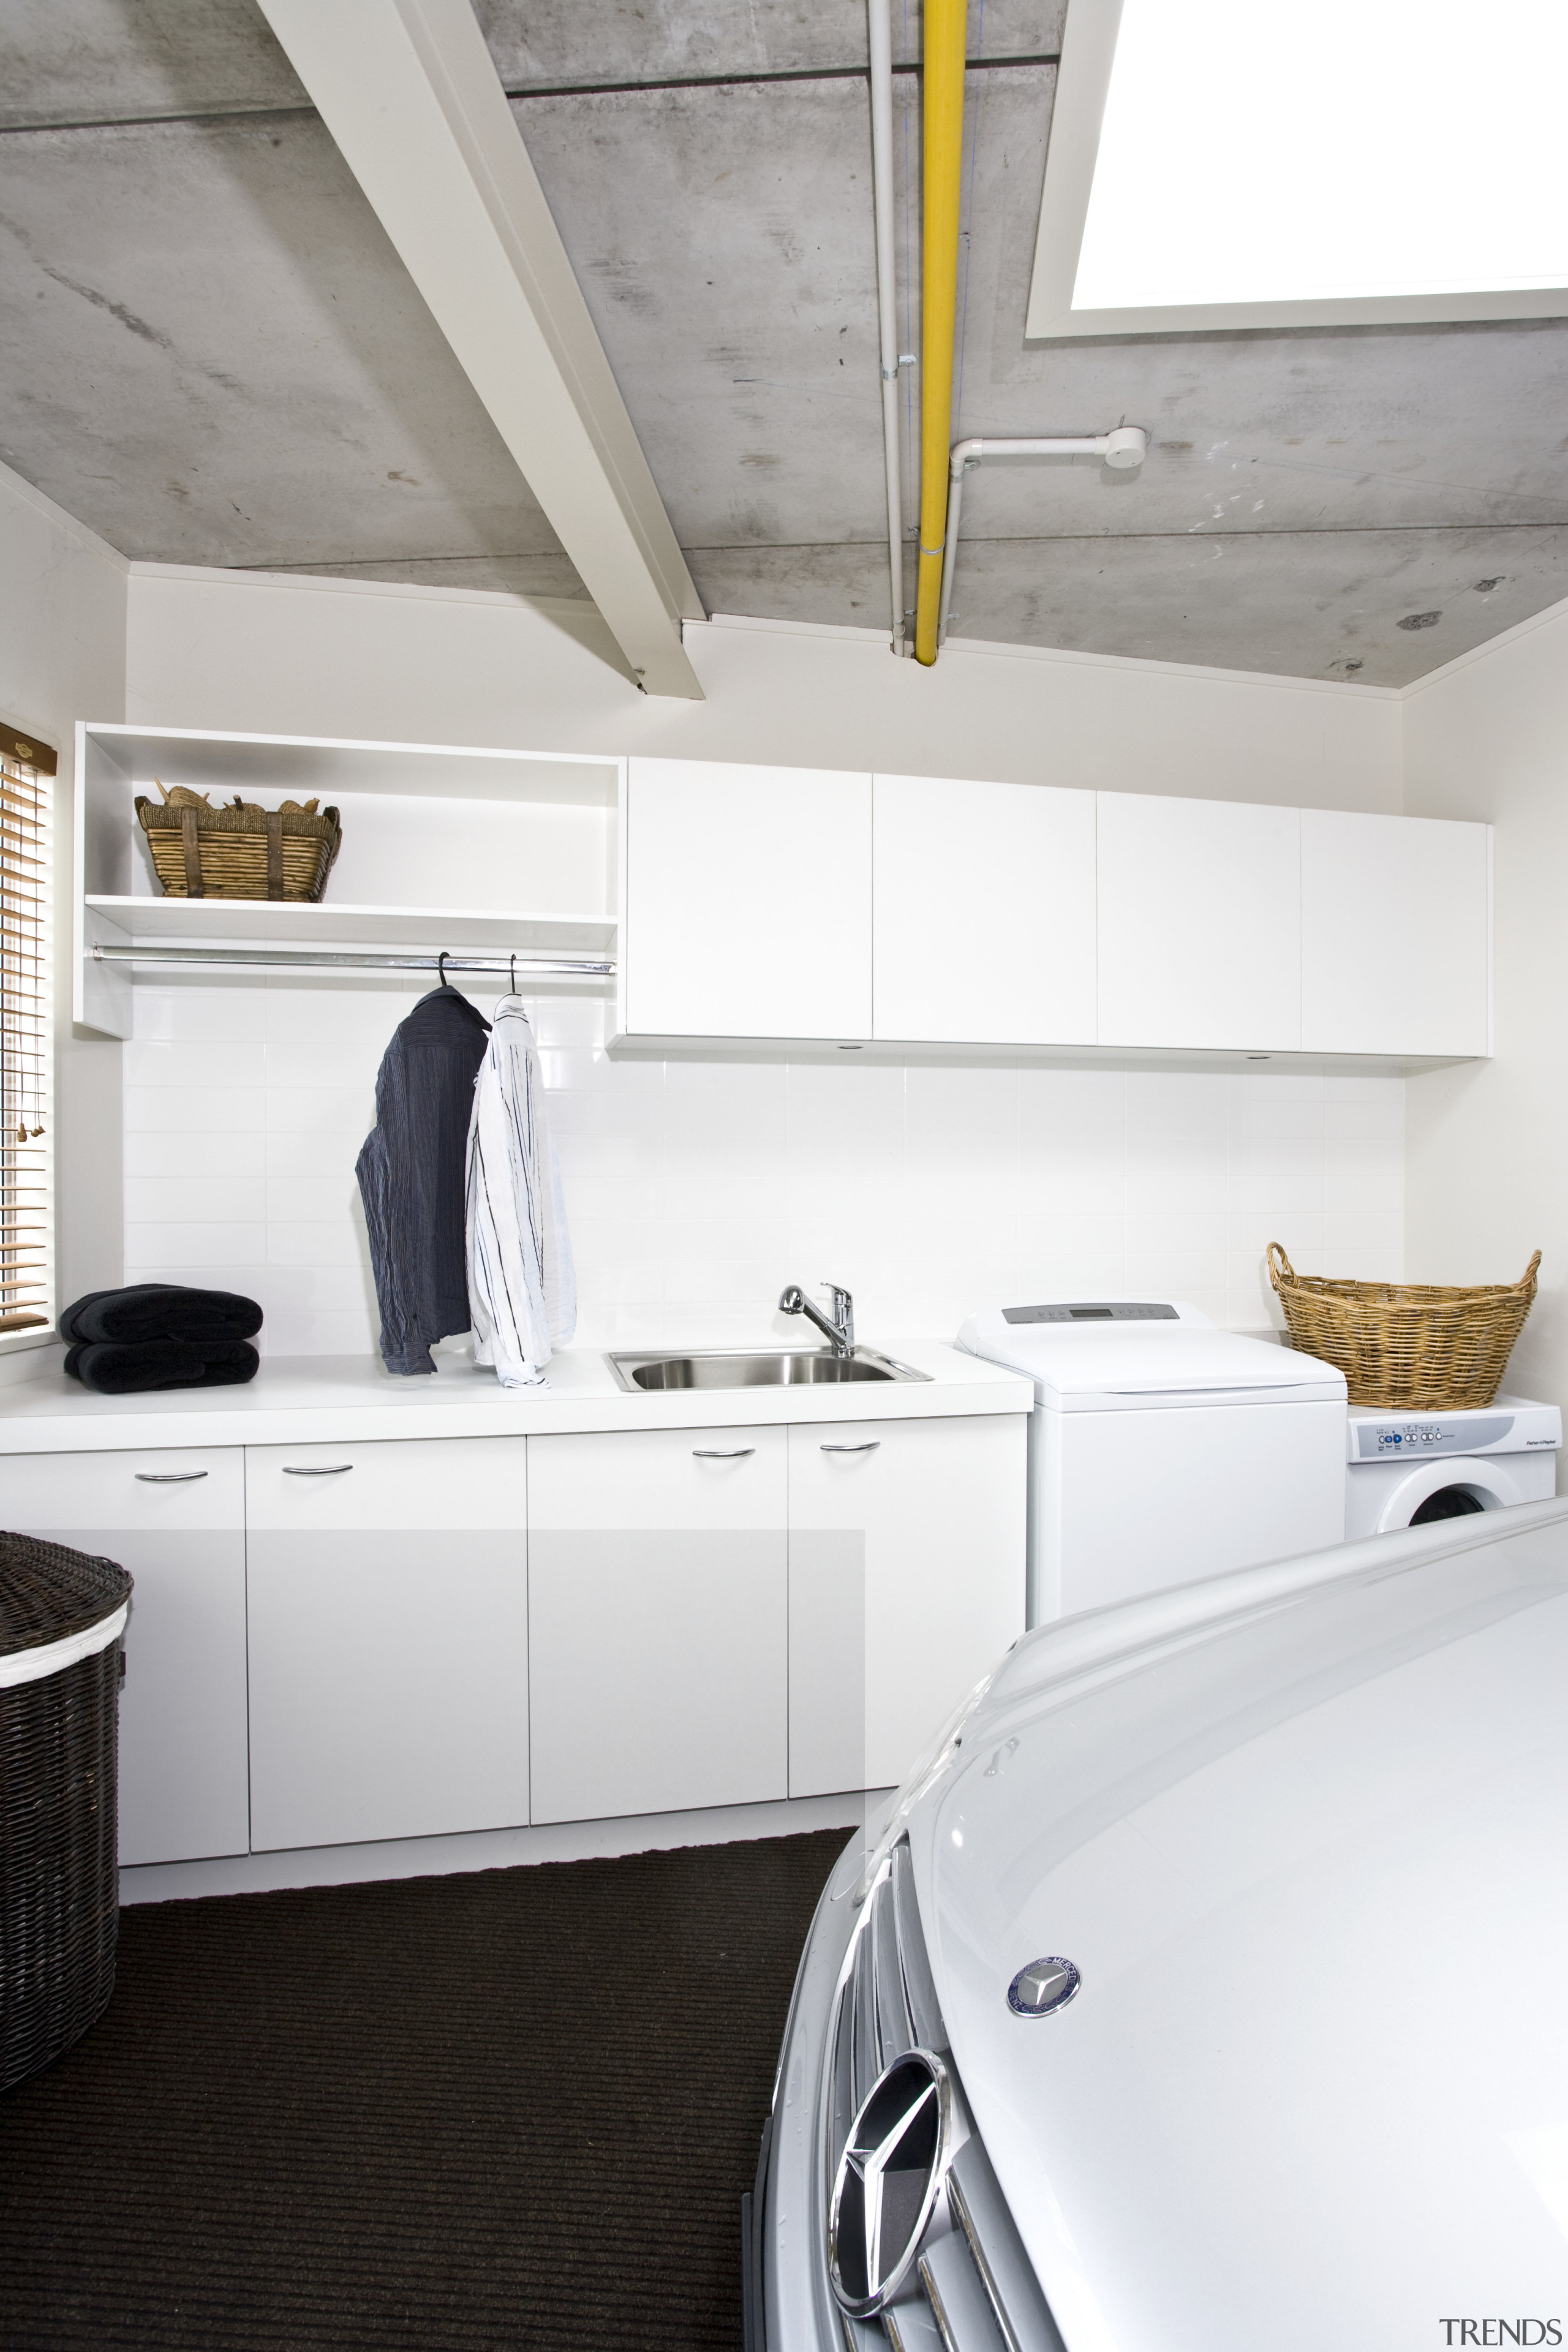 View of a laundry which was added to floor, house, interior design, kitchen, product design, room, white